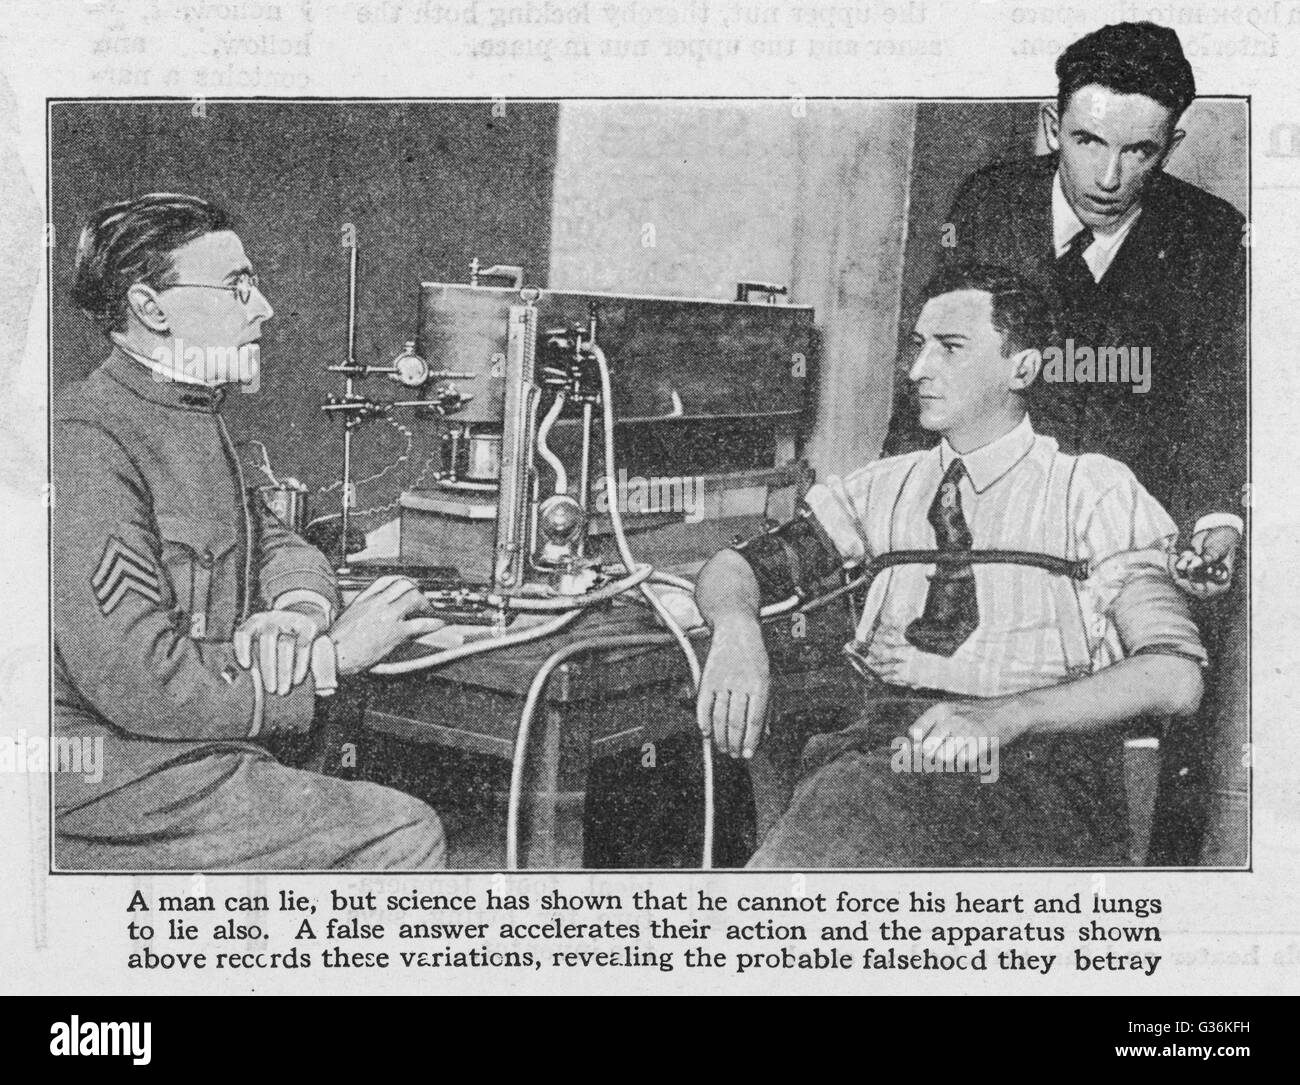 American instrument for the detection of uttered fibs, falsehoods, and other untruths, based on responses of the subject's heart and  lungs     Date: 1923 Stock Photo